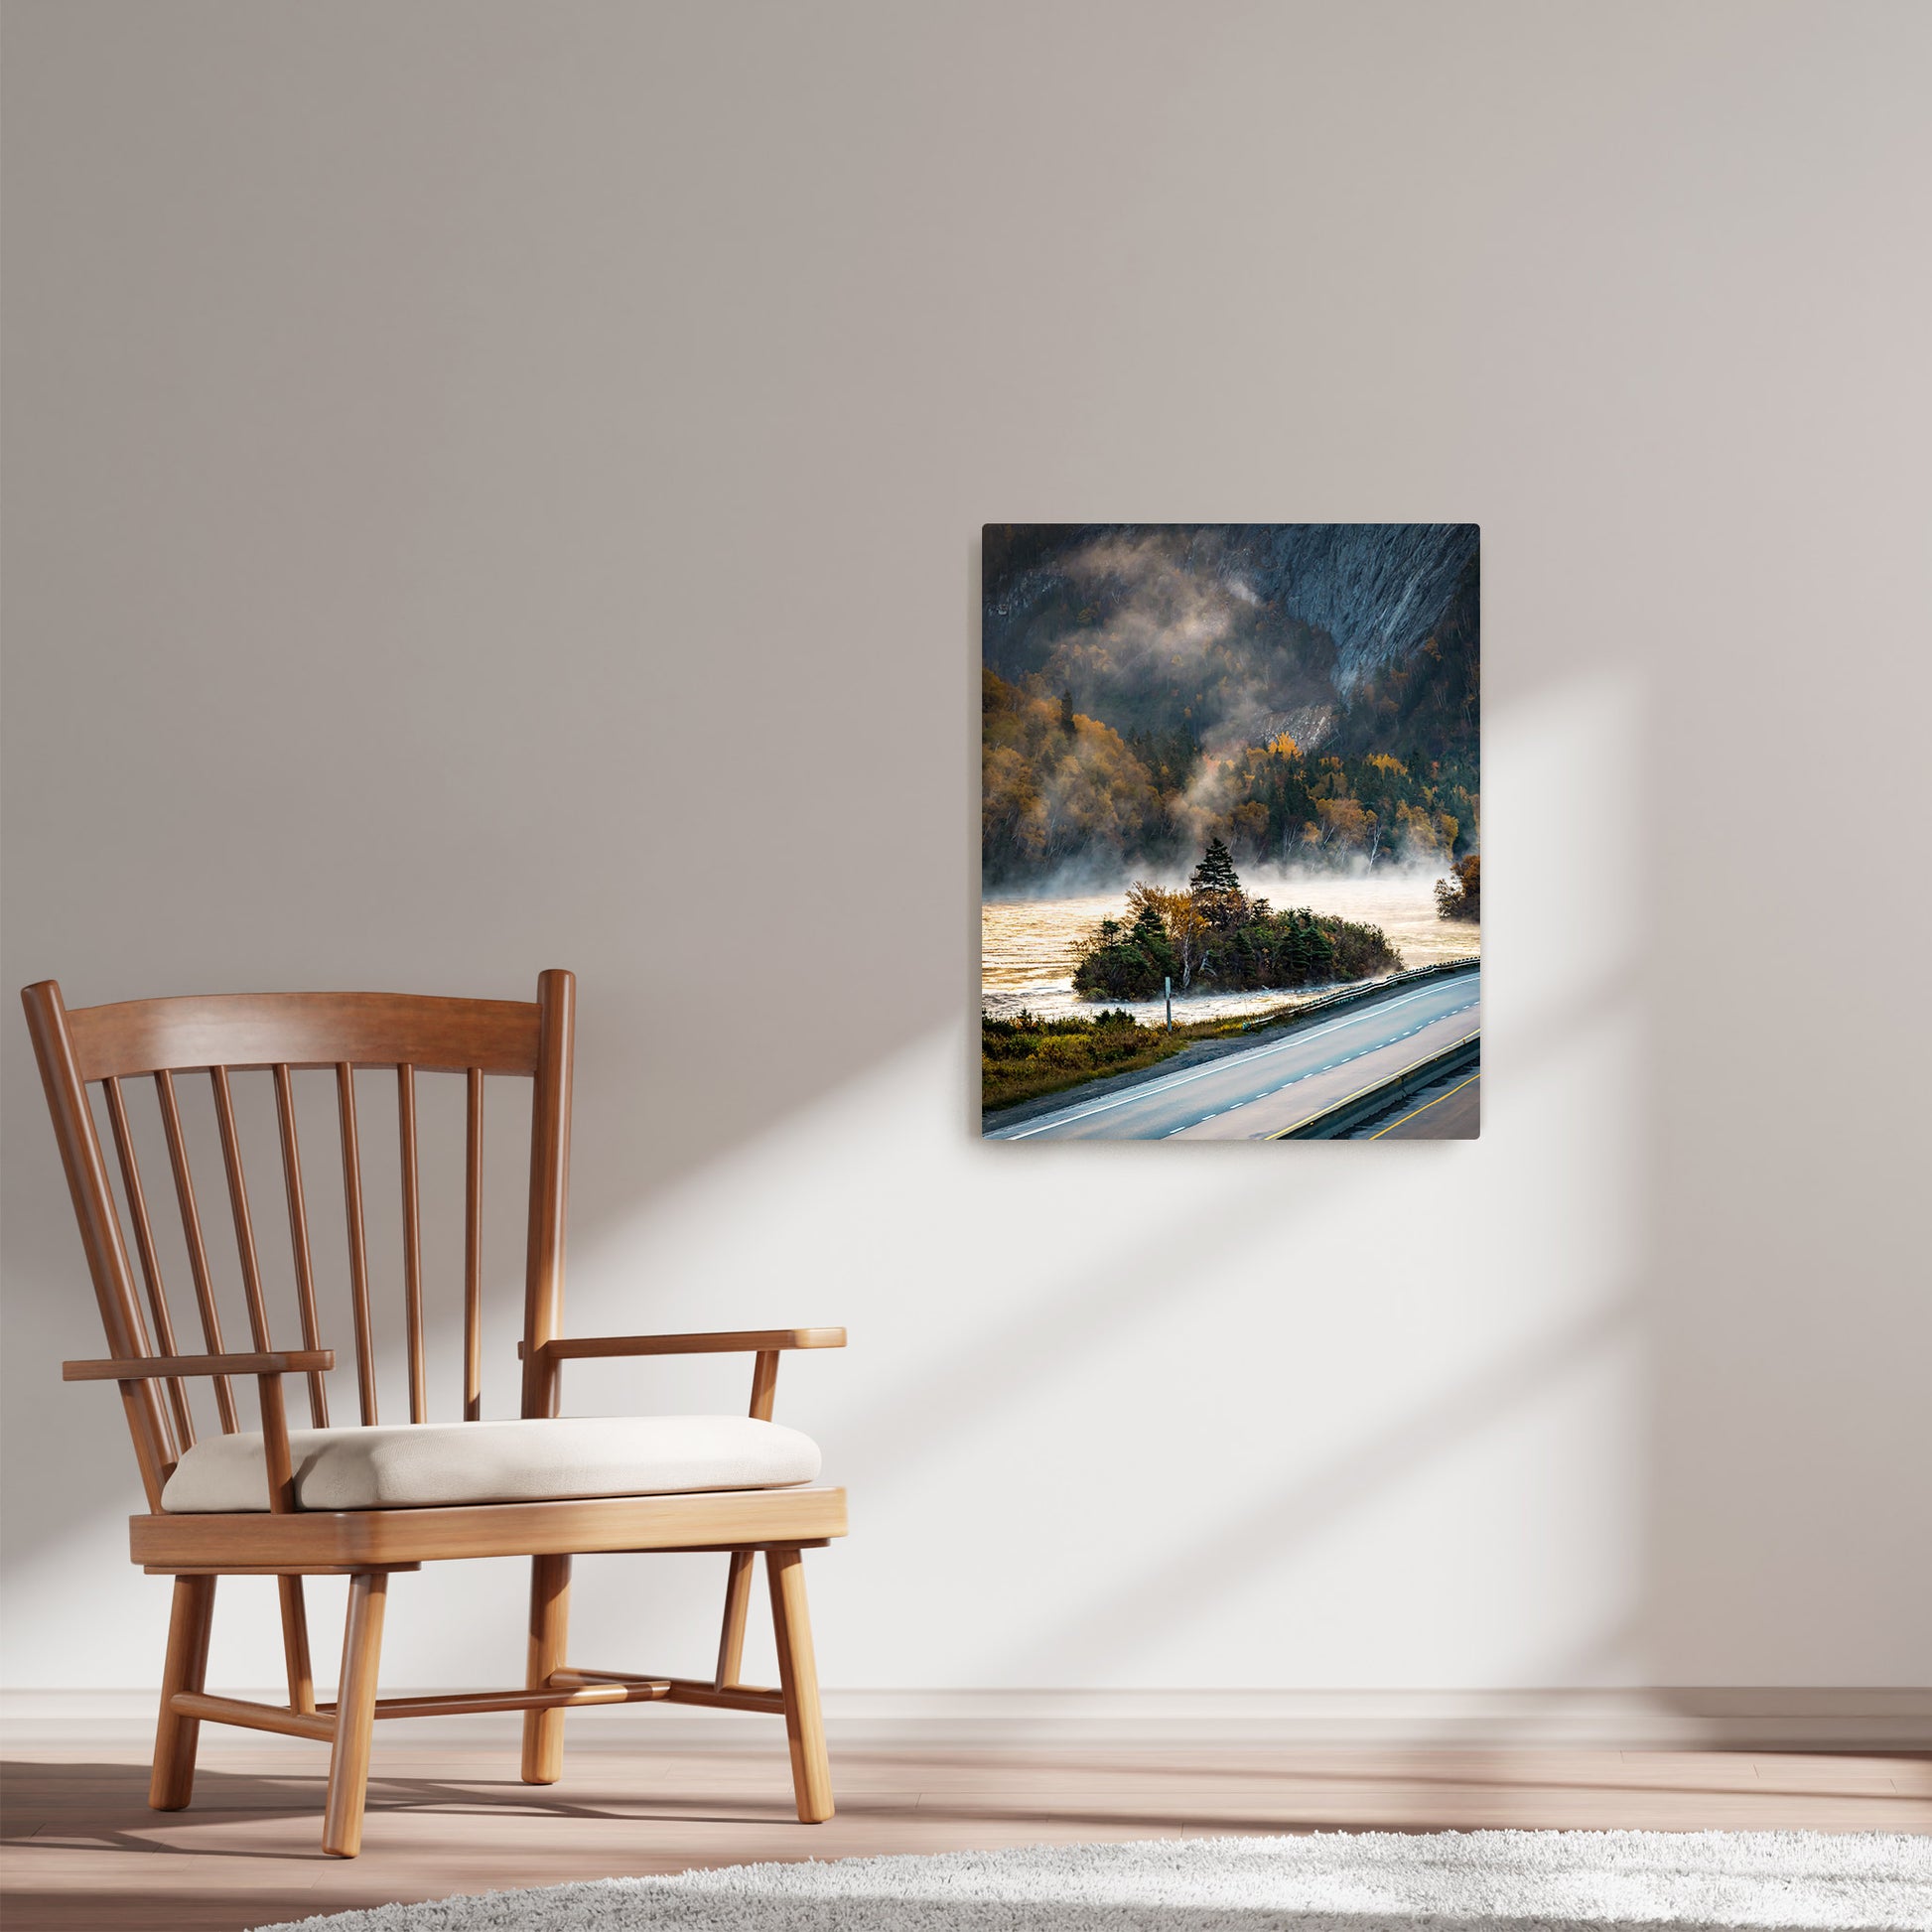 Ray Mackey's Humber River Mist photography reproduced on HD metal print and displayed on wall